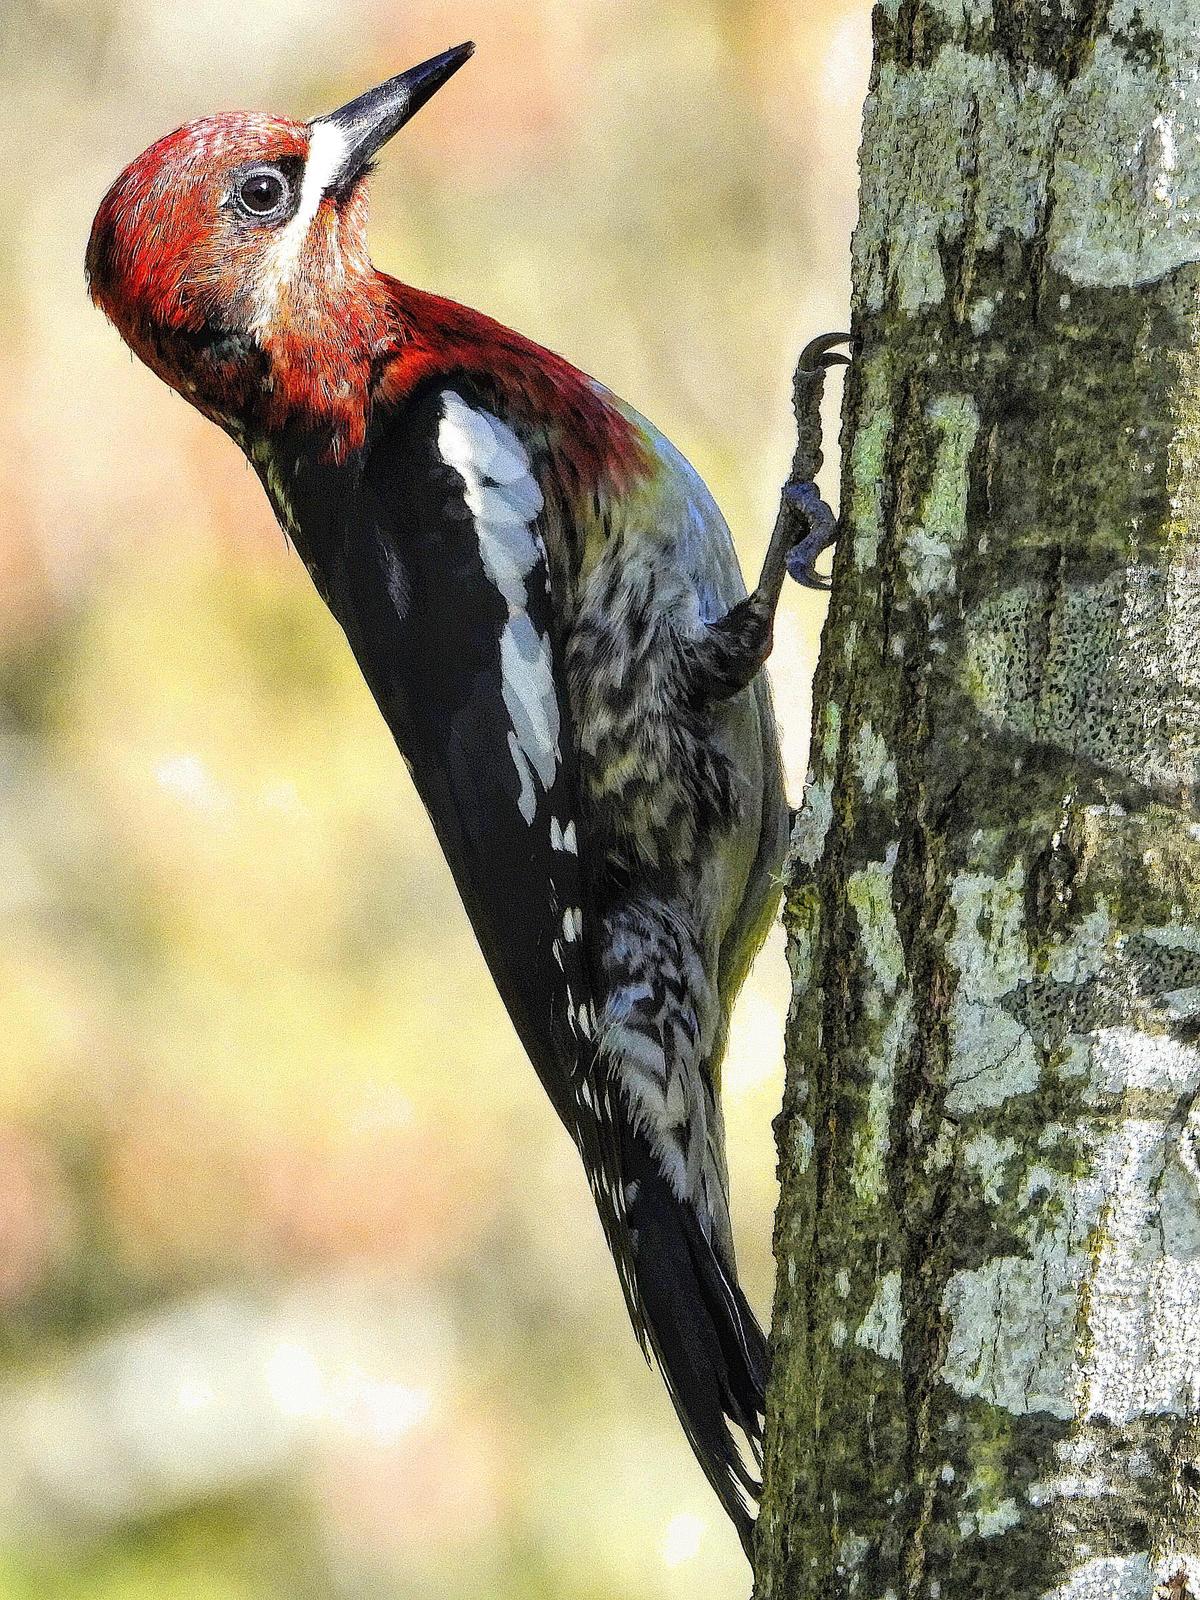 Red-breasted Sapsucker Photo by Dan Tallman